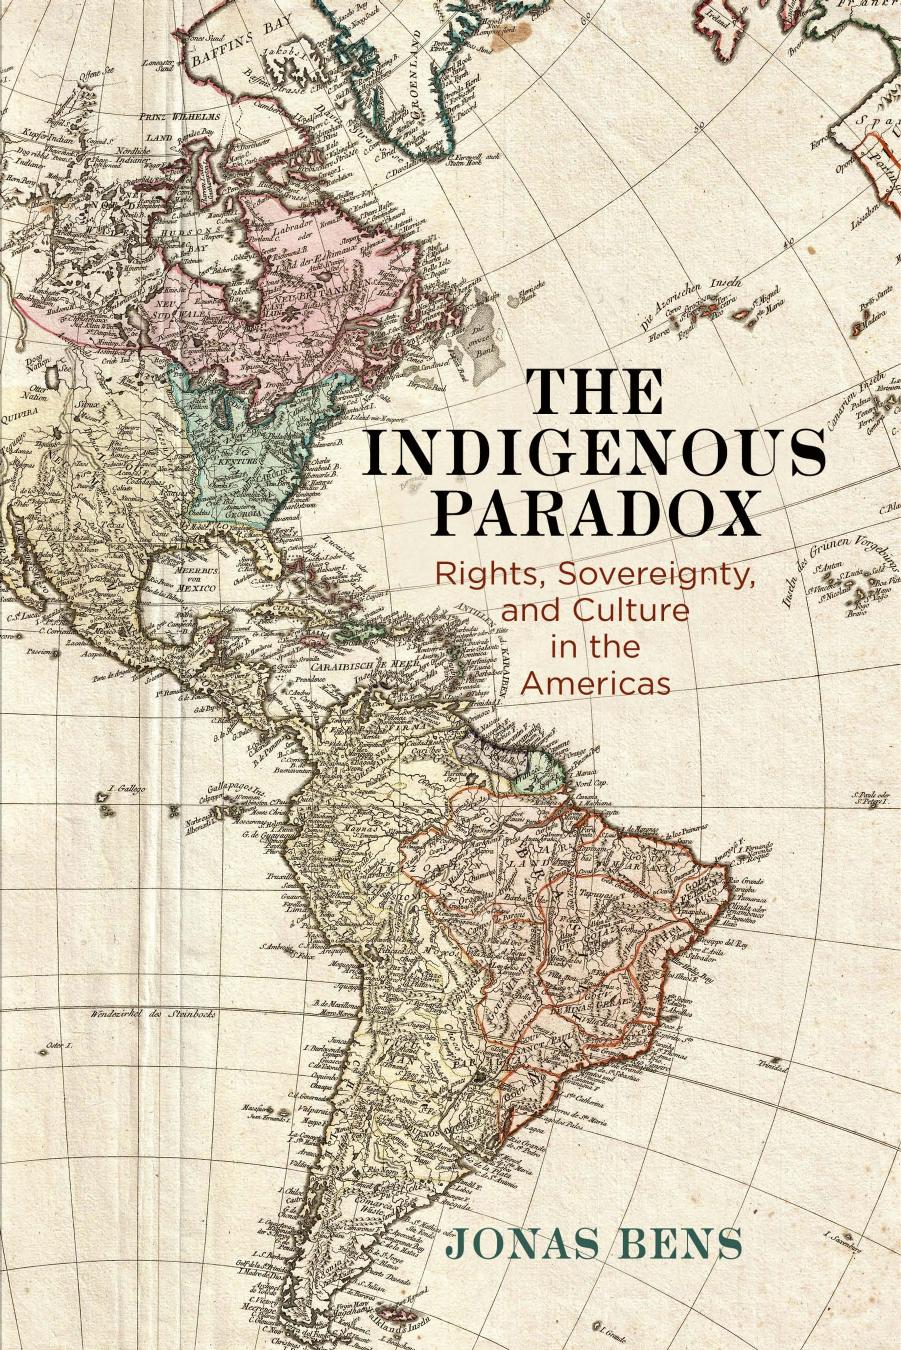 The Indigenous Paradox by Jonas Bens